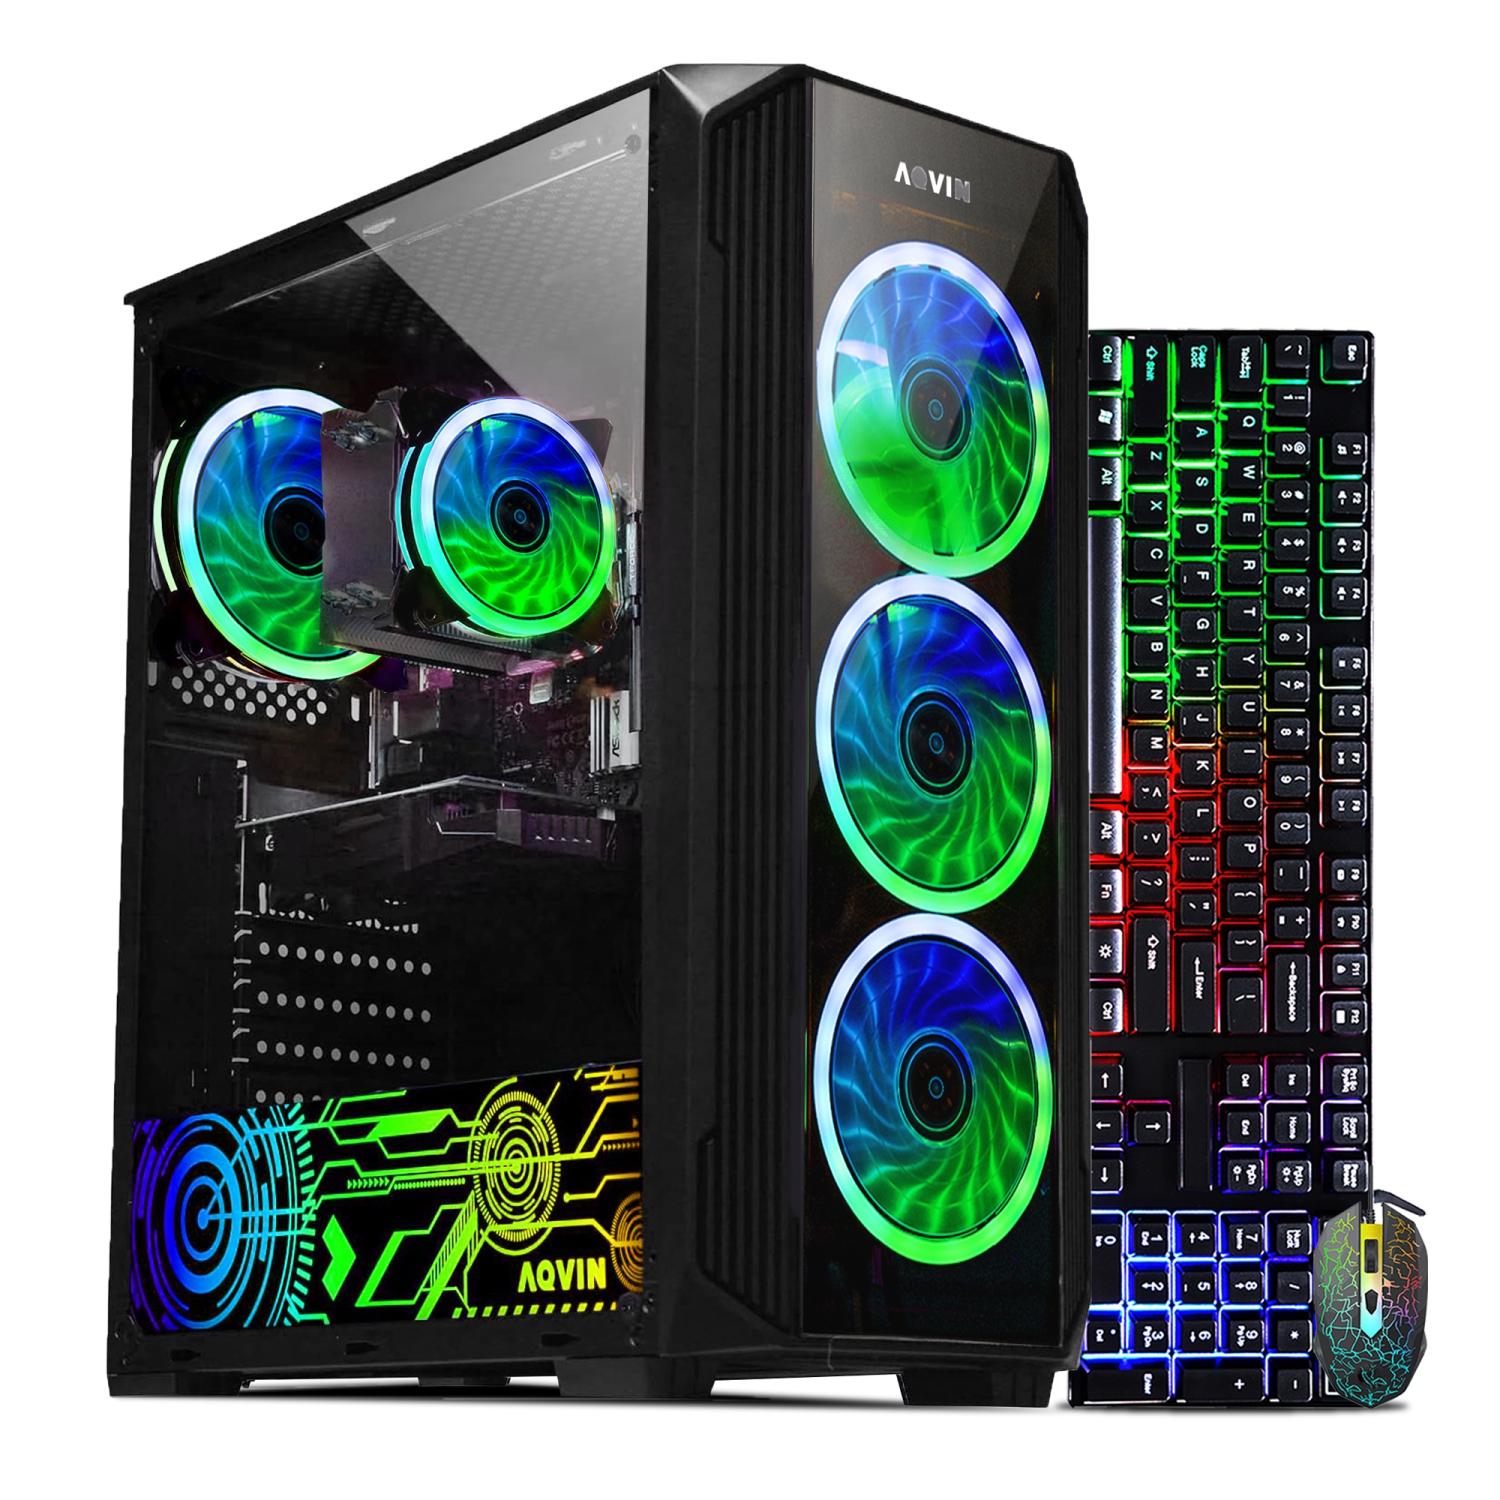 AQVIN ZForce Gaming PC Tower Desktop Computer - RGB (Intel Core i5 processor/ 32GB DDR4 RAM/ 1TB SSD/ GeForce RTX 3050 8GB/ Windows 11) Gaming Keyboard and Mouse - Only at Best Buy